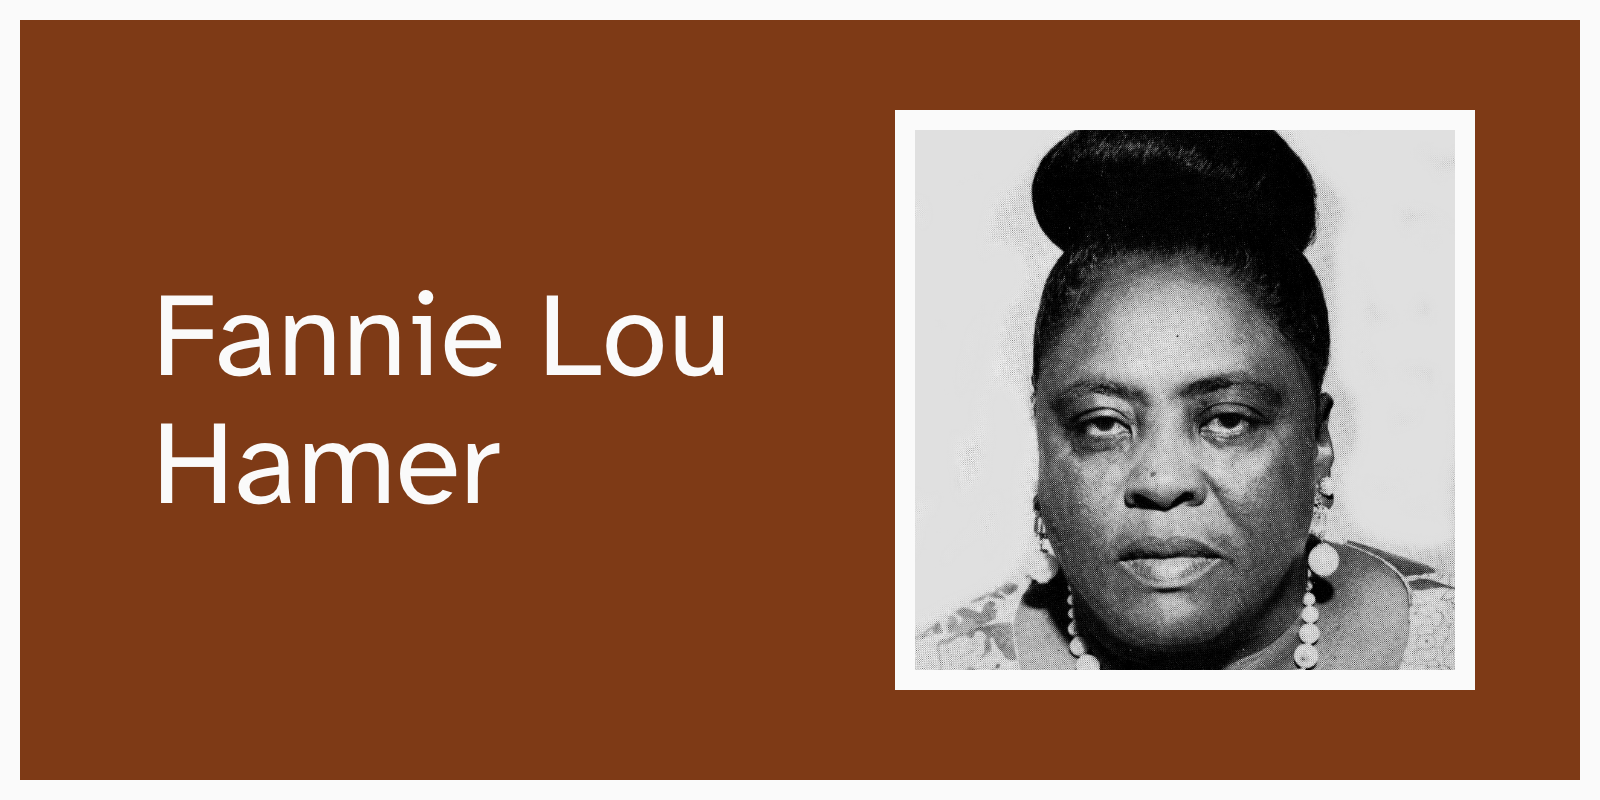 Image description: The header panel reads Fannie Lou Hamer. A photo of Hamer looking straight into the camera. She is a black woman with her hair in a bun and wearing large earrings.